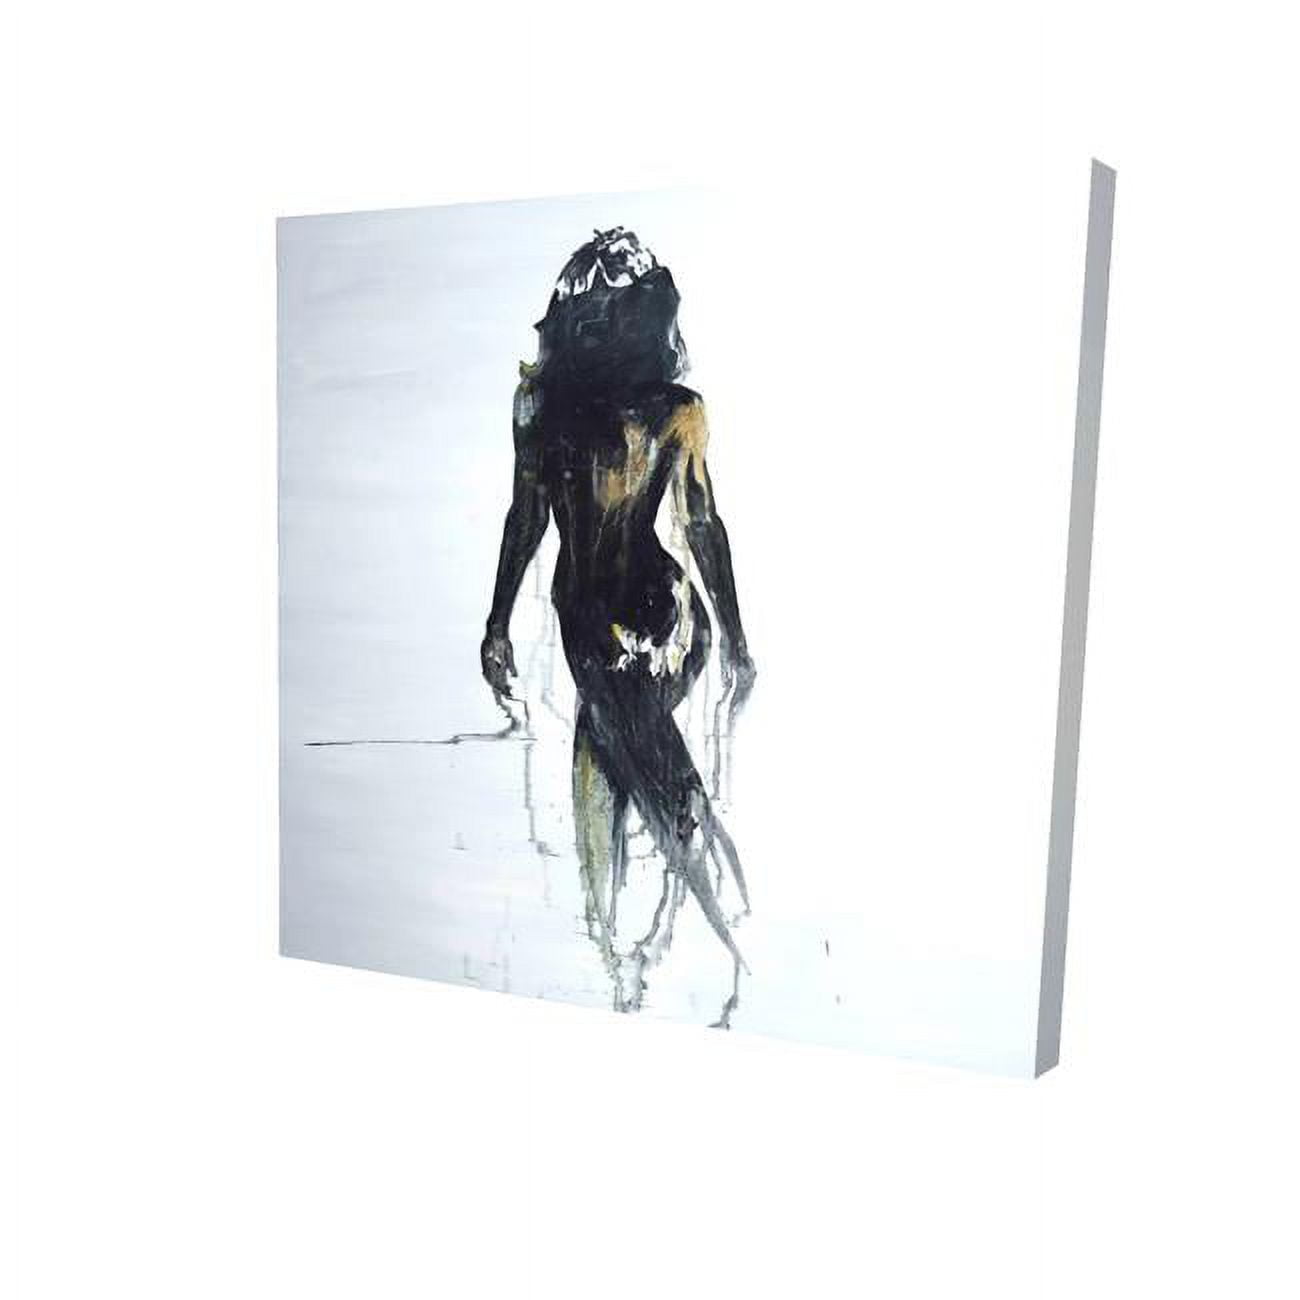 Begin Home Decor 2080-1616-FI66 16 x 16 in. Abstract Back View of A Woman Silhouette-Print on Canvas